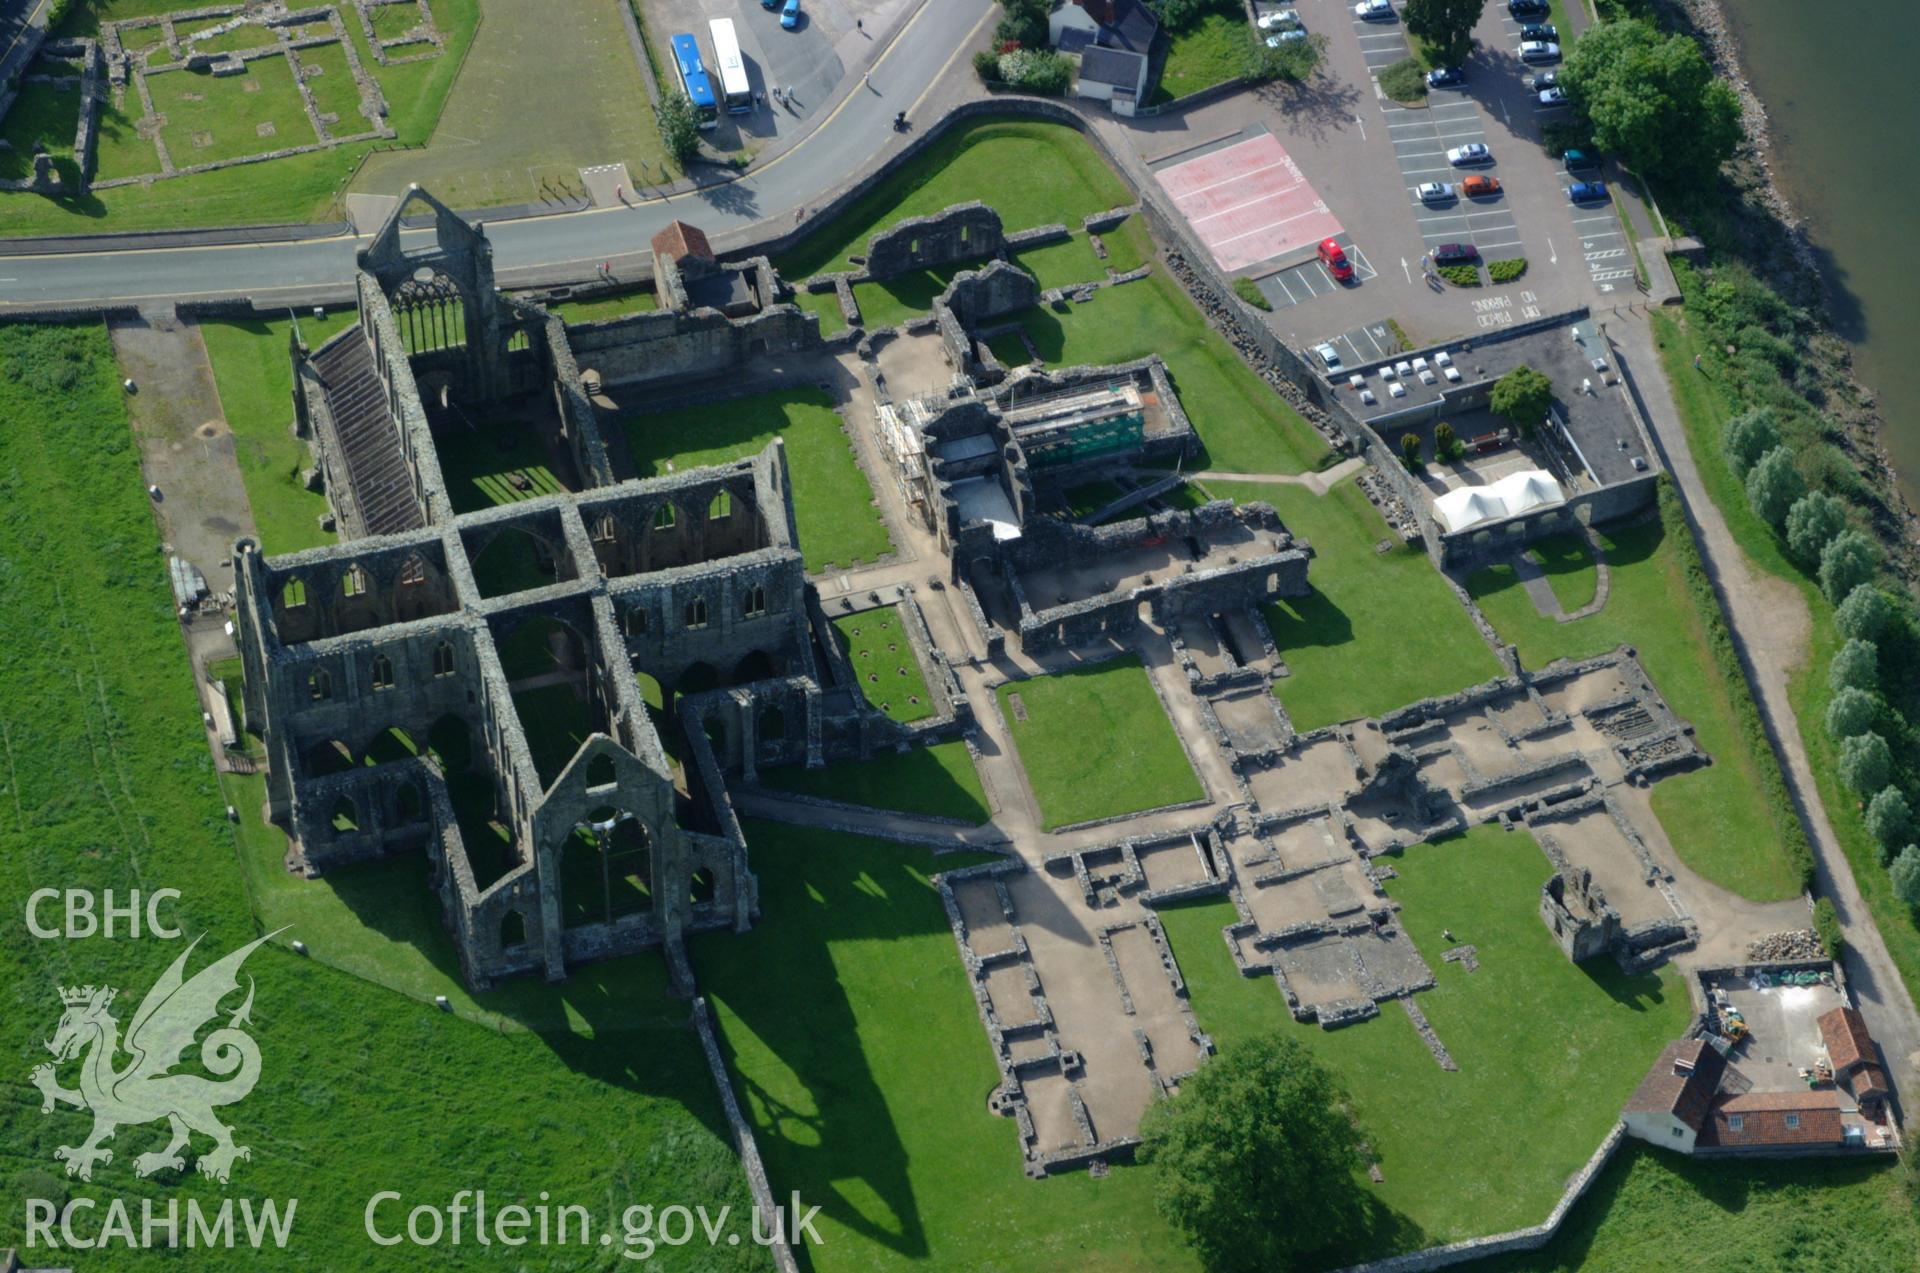 RCAHMW colour oblique aerial photograph of Tintern Abbey taken on 02/06/2004 by Toby Driver